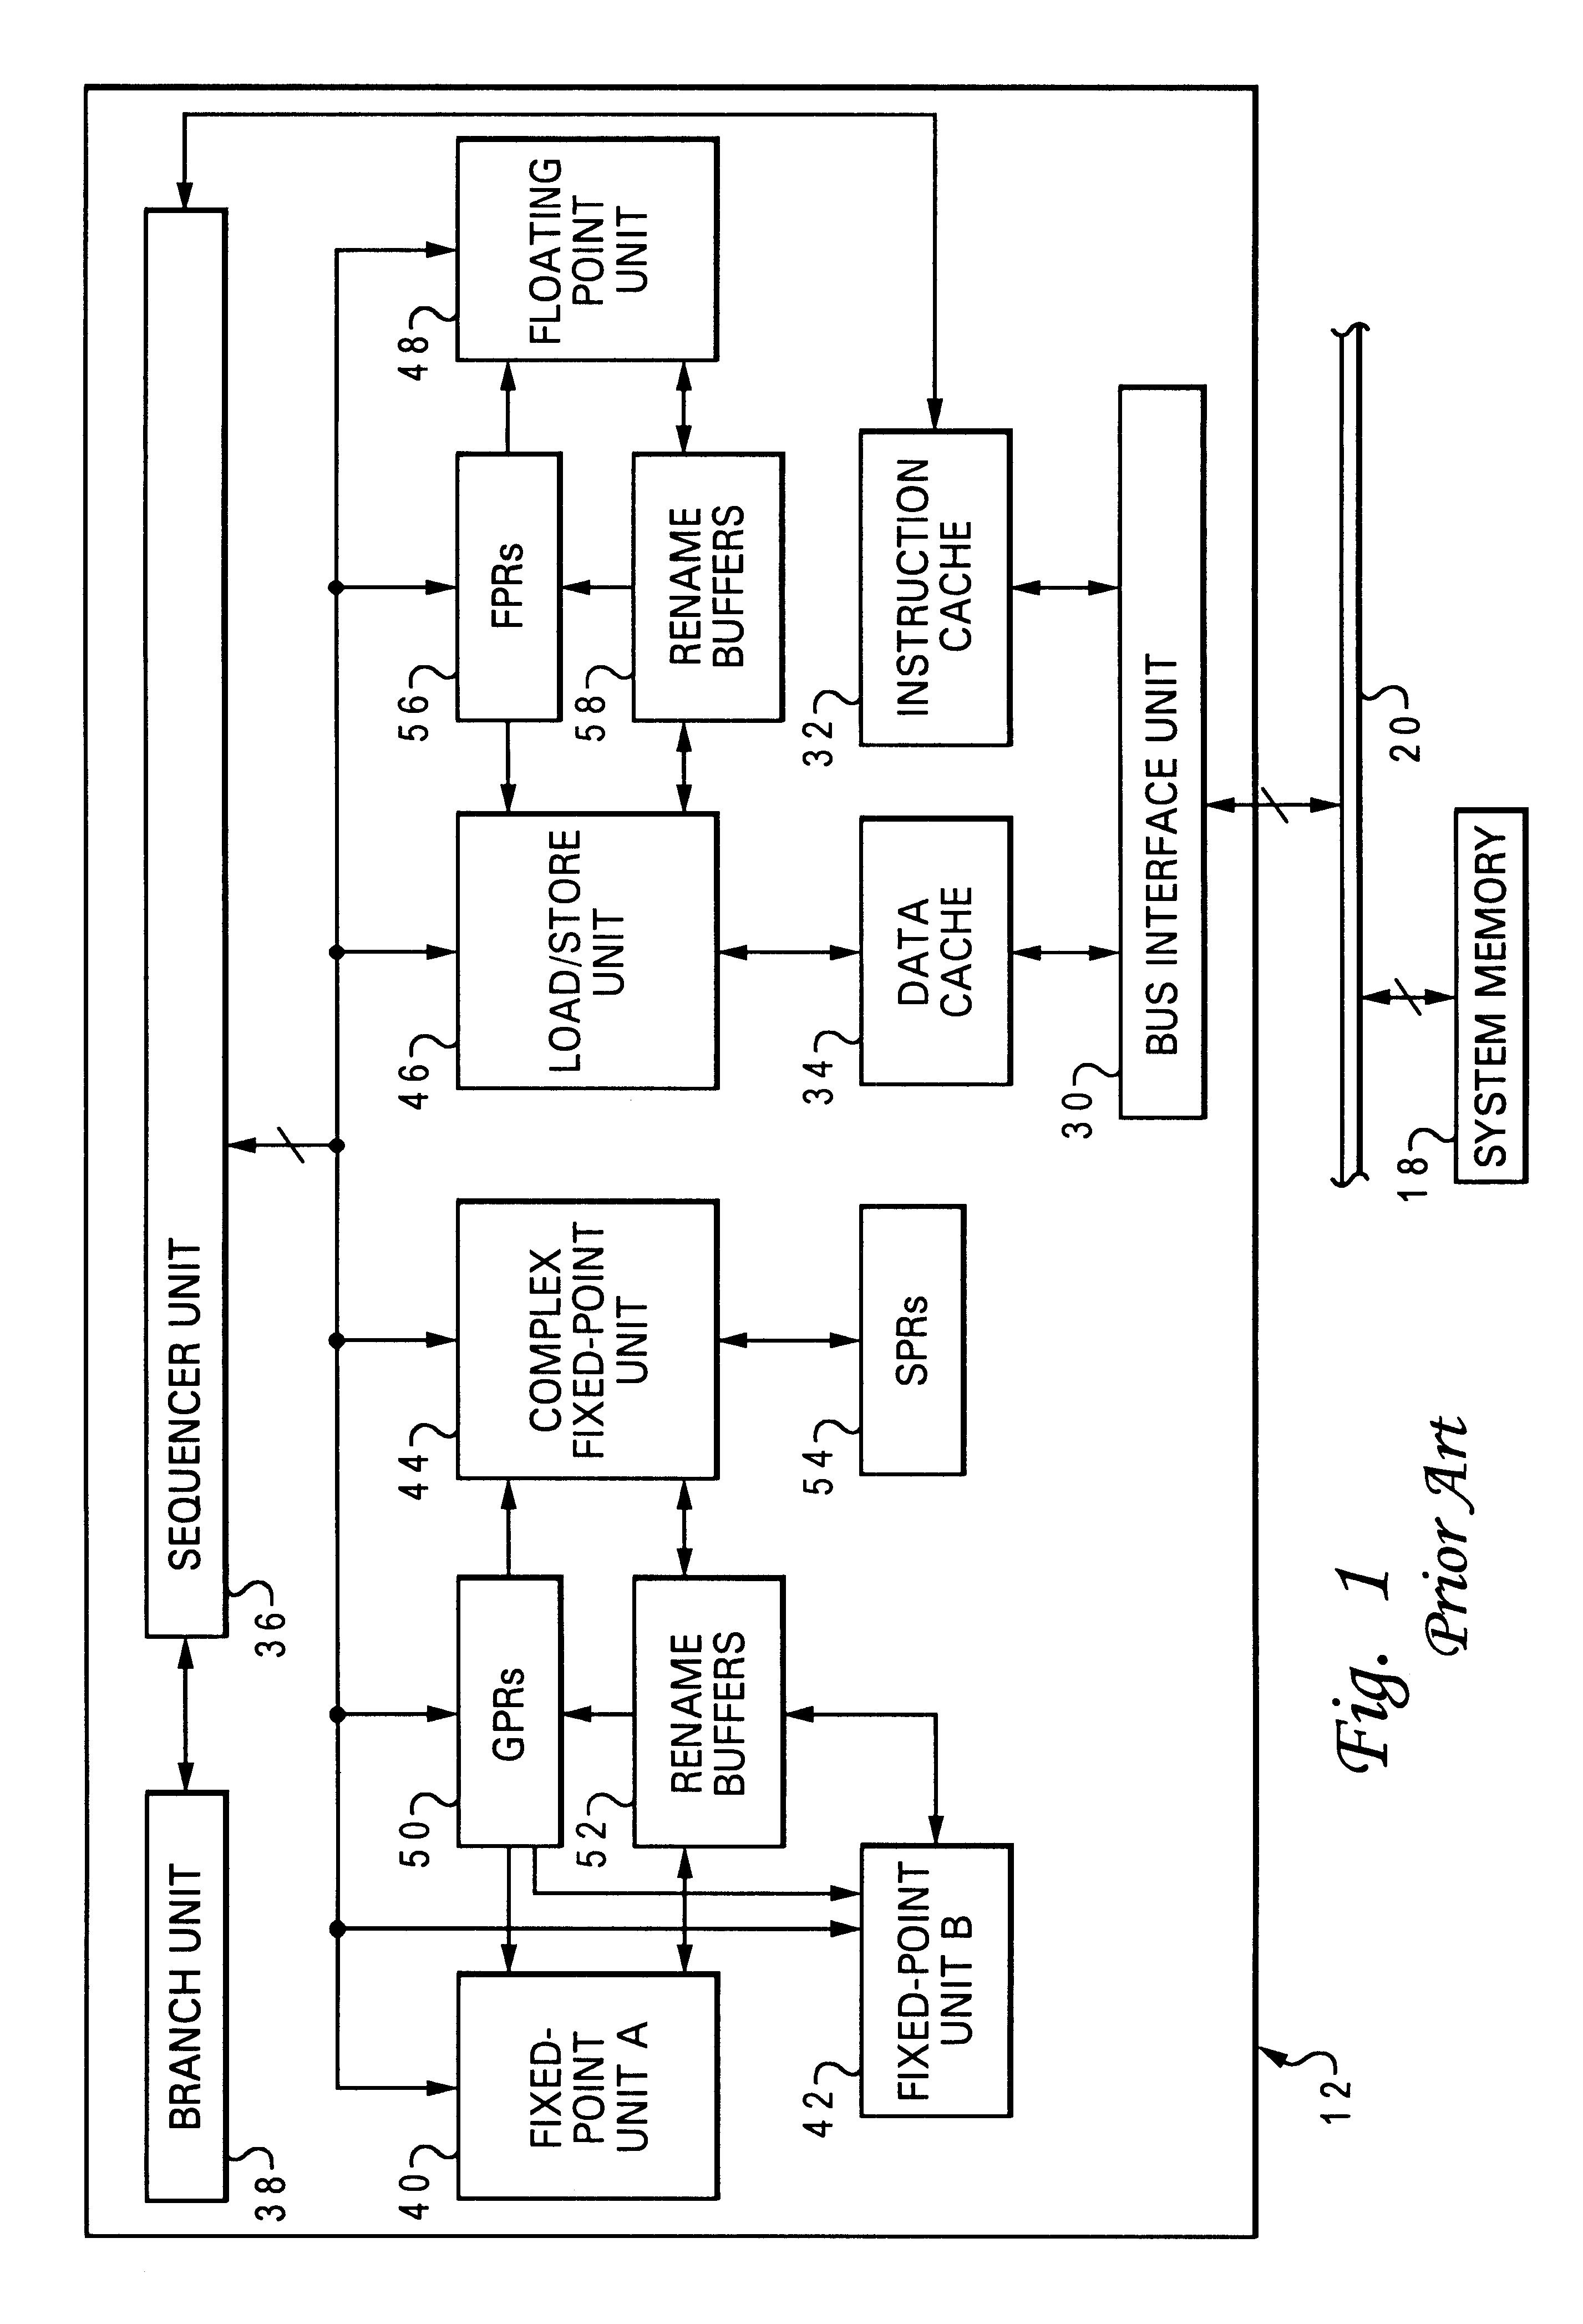 Method and system for clearing dependent speculations from a request queue